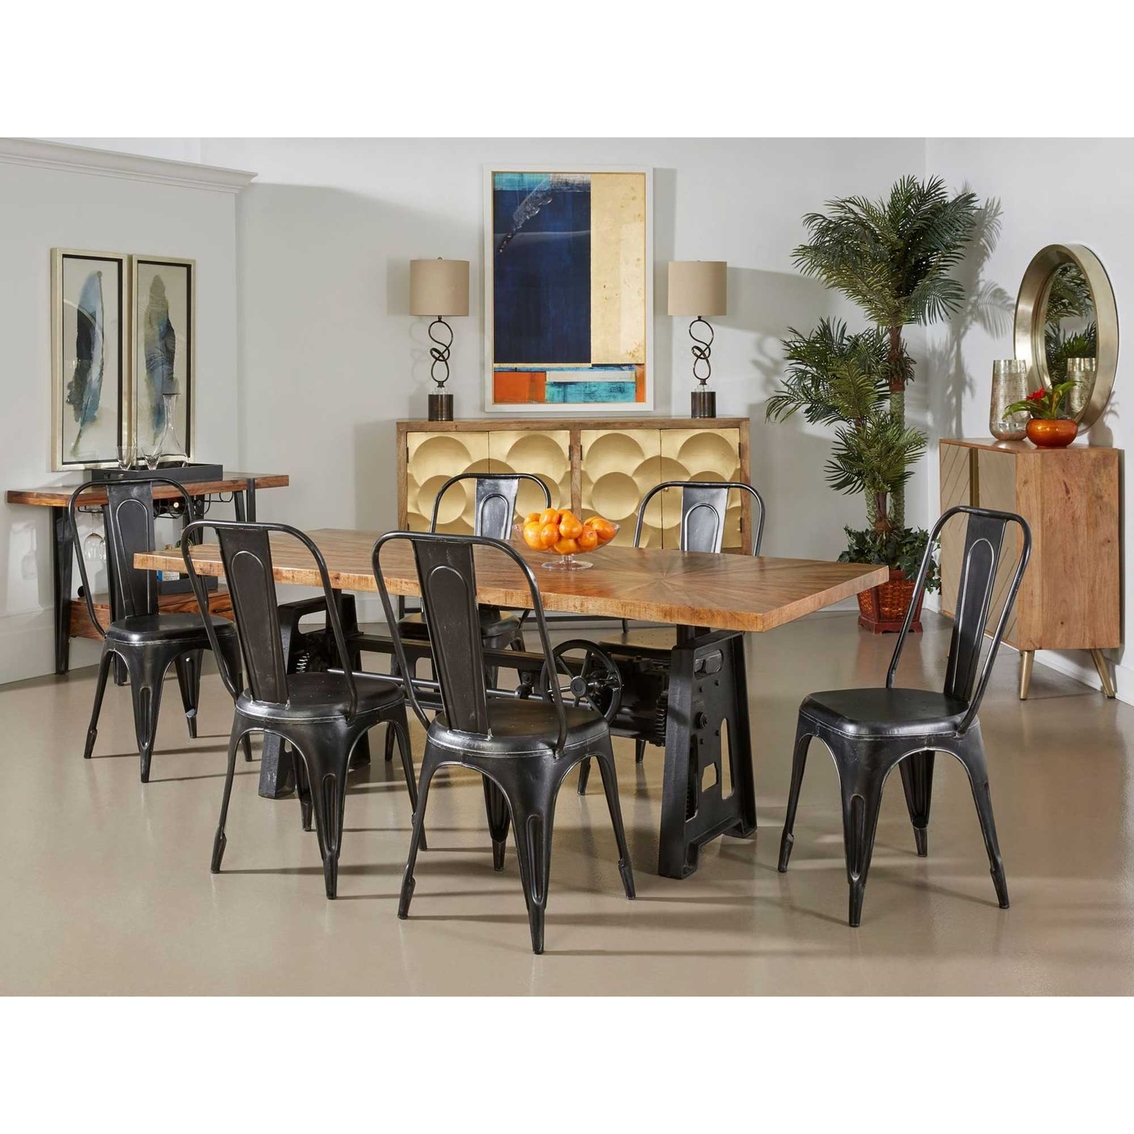 Coast to Coast Accents Del Sol Adjustable Height Crank Dining Table - Image 6 of 7